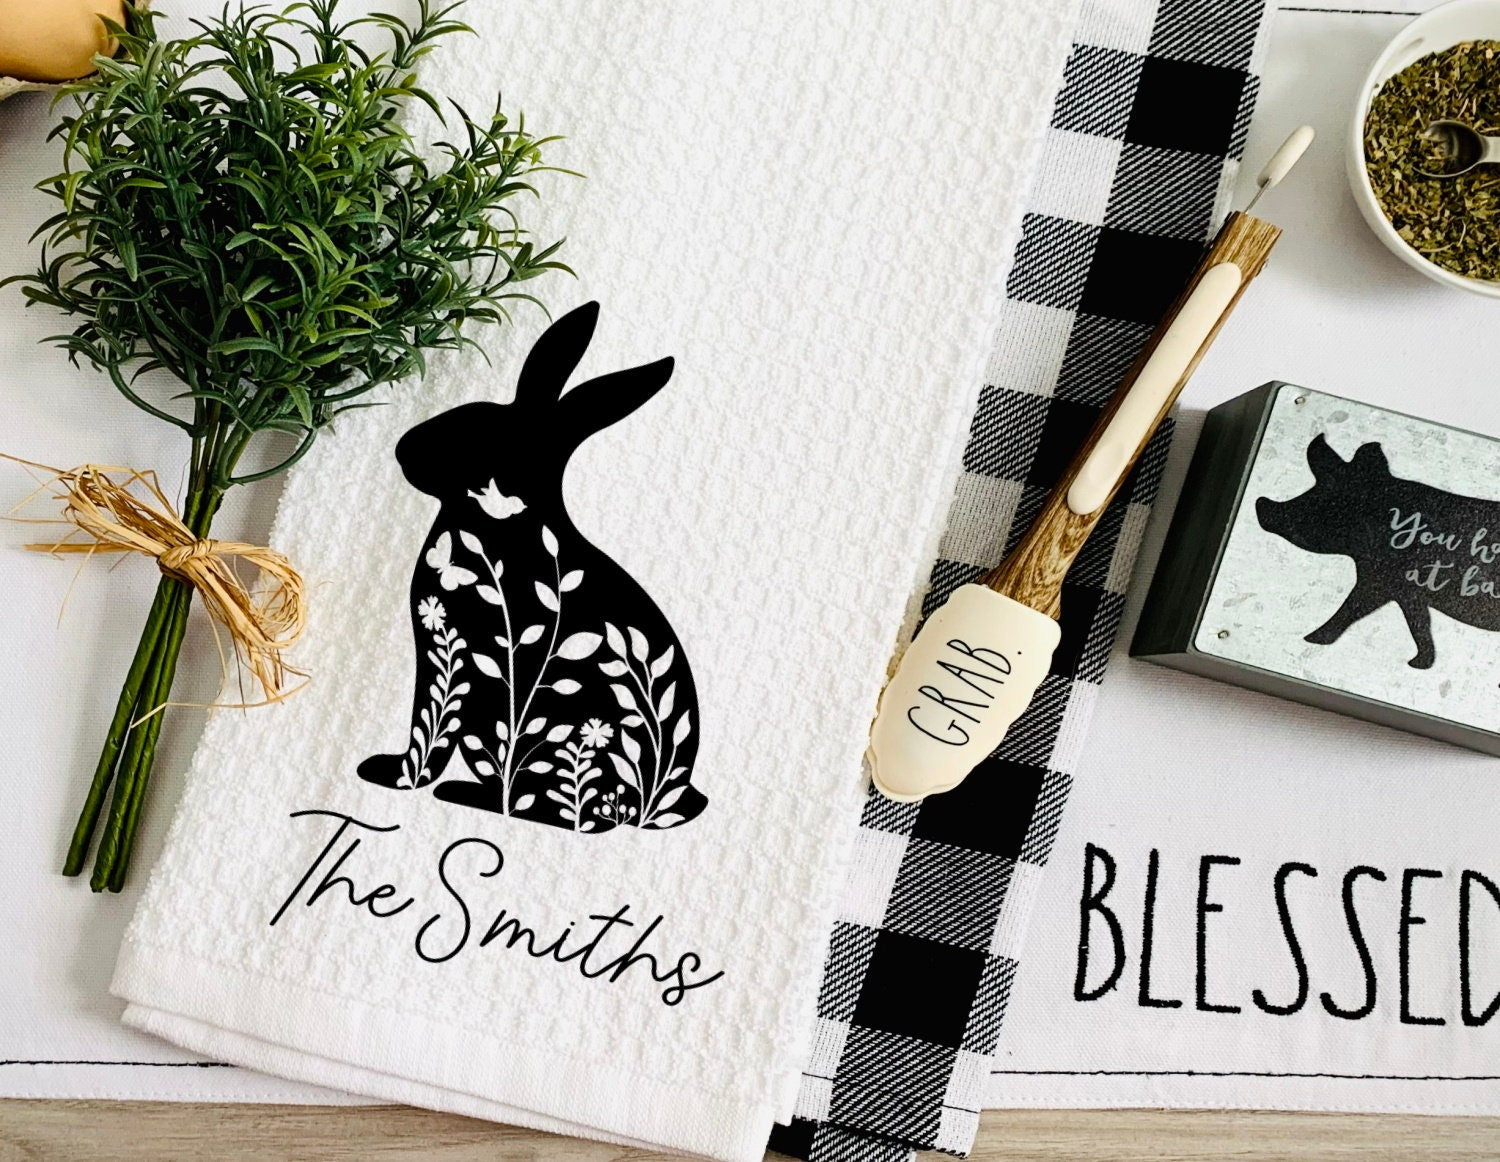 Floral Rabbit Silhouette Personalized Kitchen Dish Towel - Easter Bunny Tea Towel Kitchen - New Home Gift Farm Decorations house Decor Towel